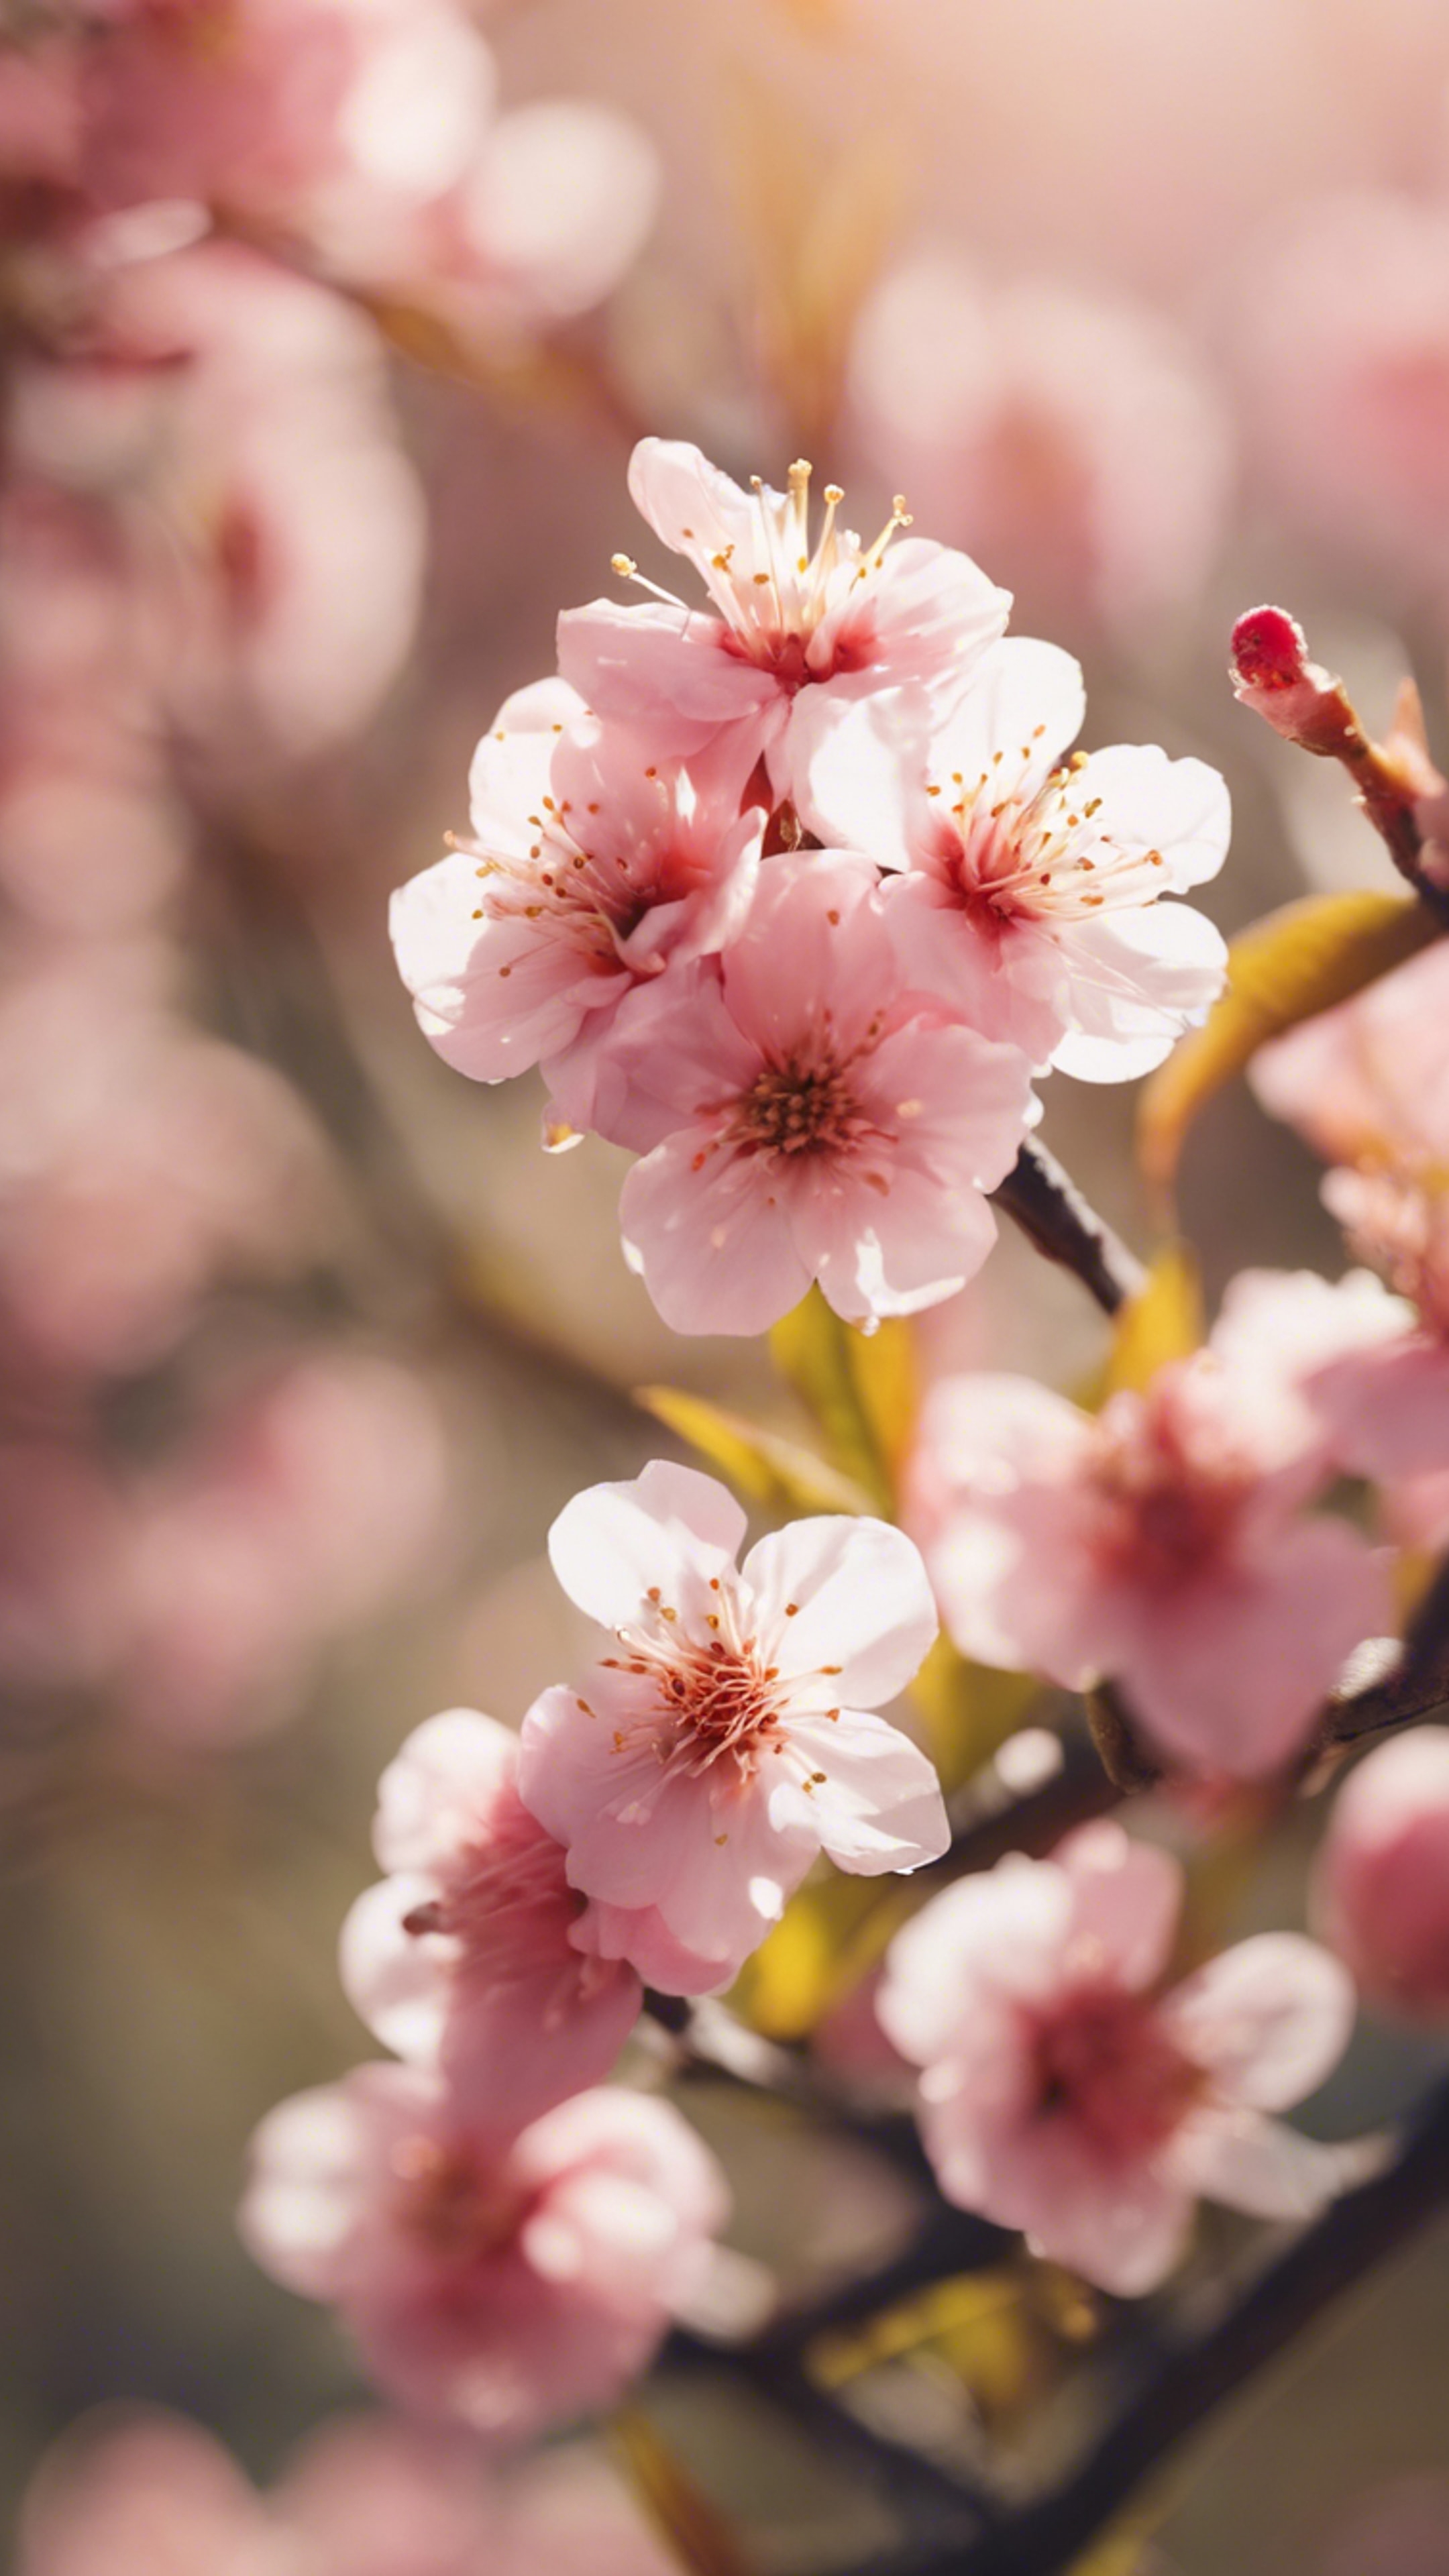 A close-up of happy peach flowers blooming cheerfully on a sunny spring day. Tapéta[9ab03d009b524efe8bfb]